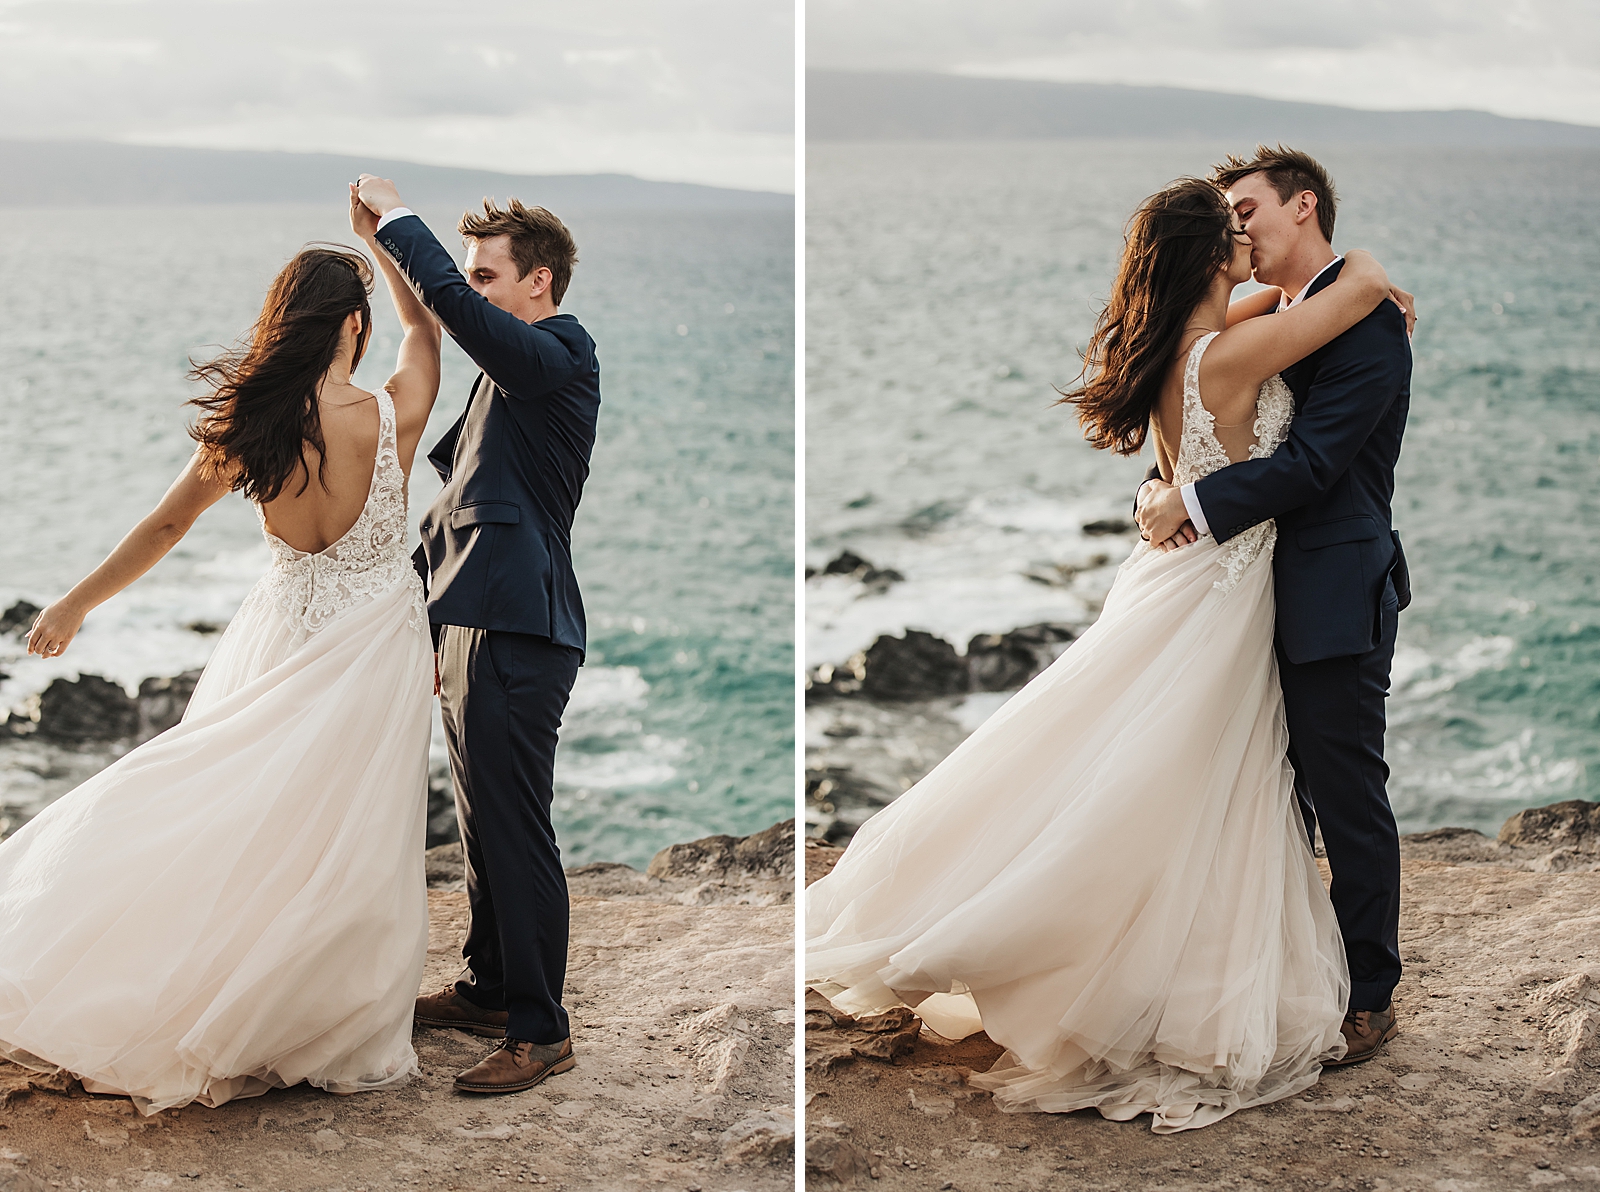 Bride twirling close holding Groom's hand by the ocean